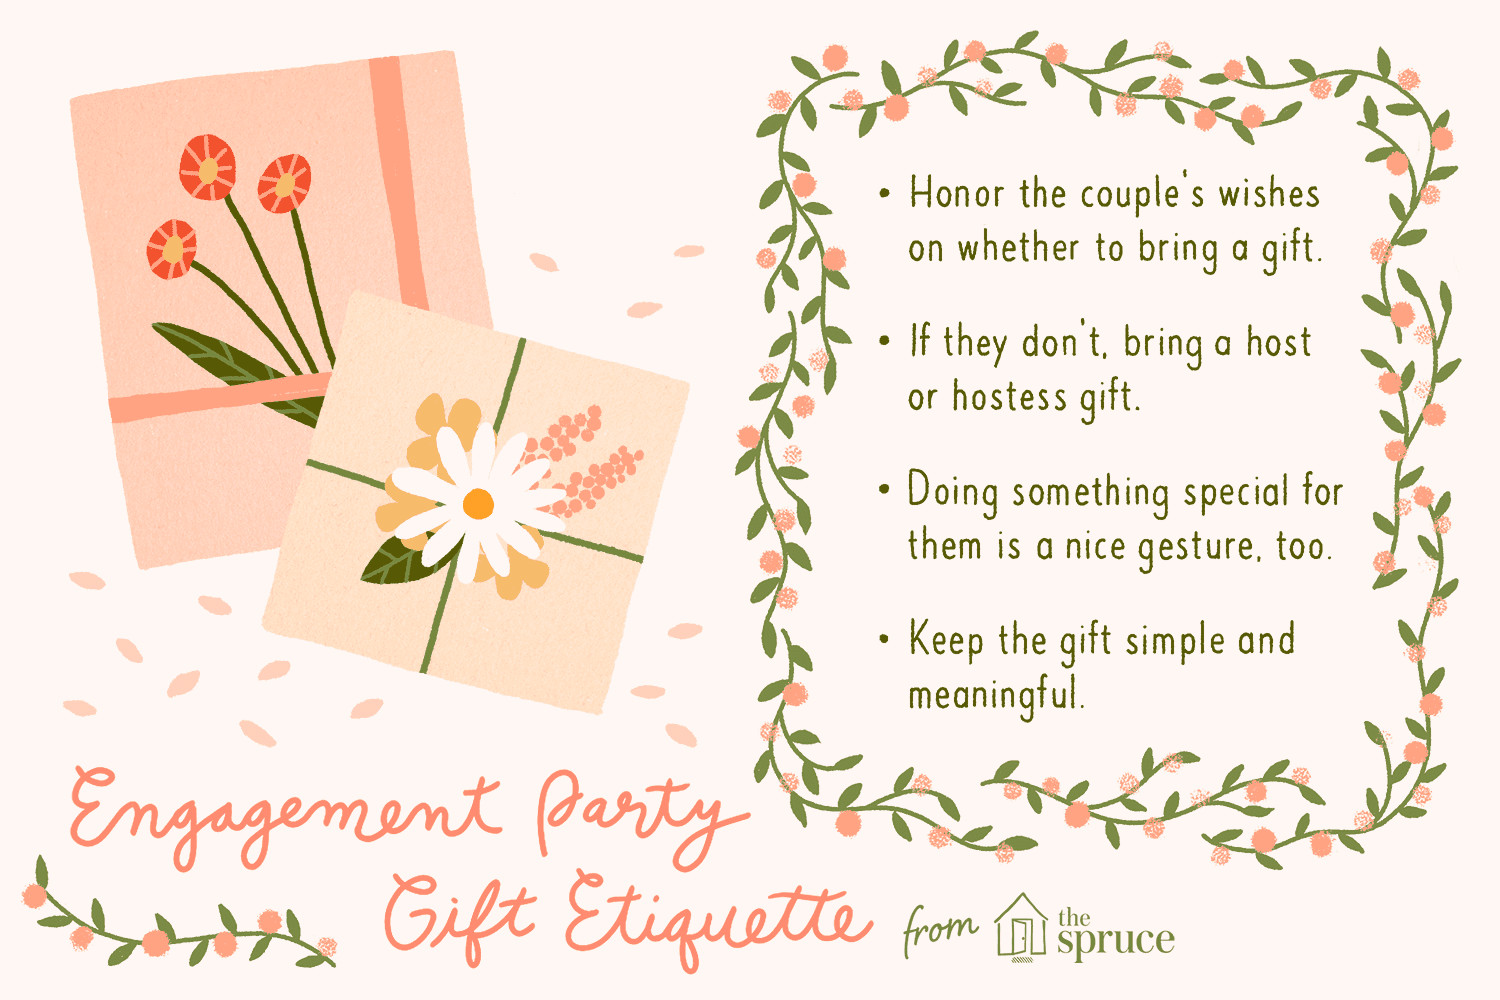 Gift Ideas For Engagement Party
 Gift Tips for the Engagement Party